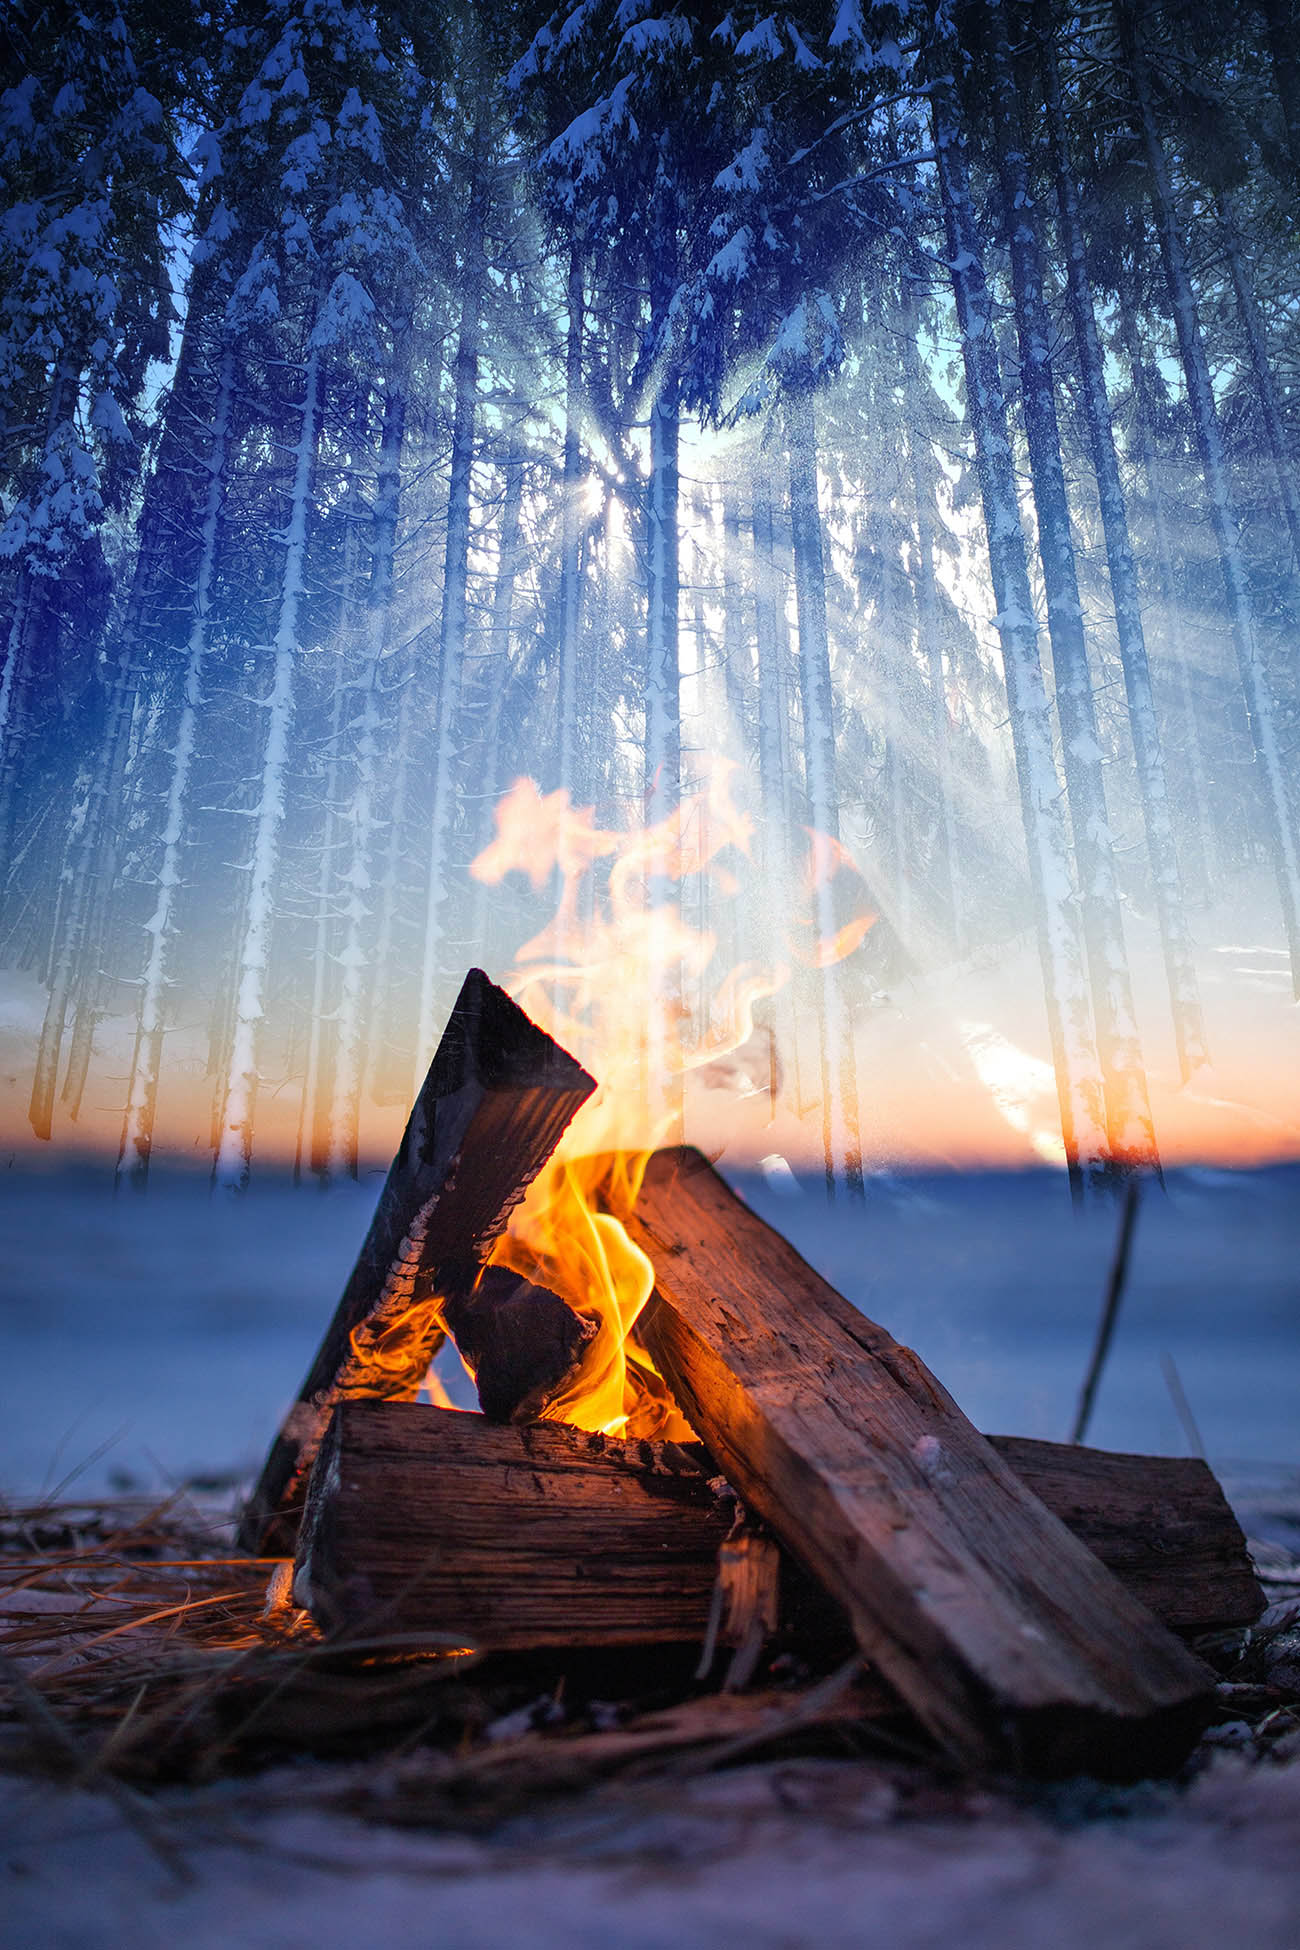 Wintery Wood Fire 01 - Colorful Stock Photos